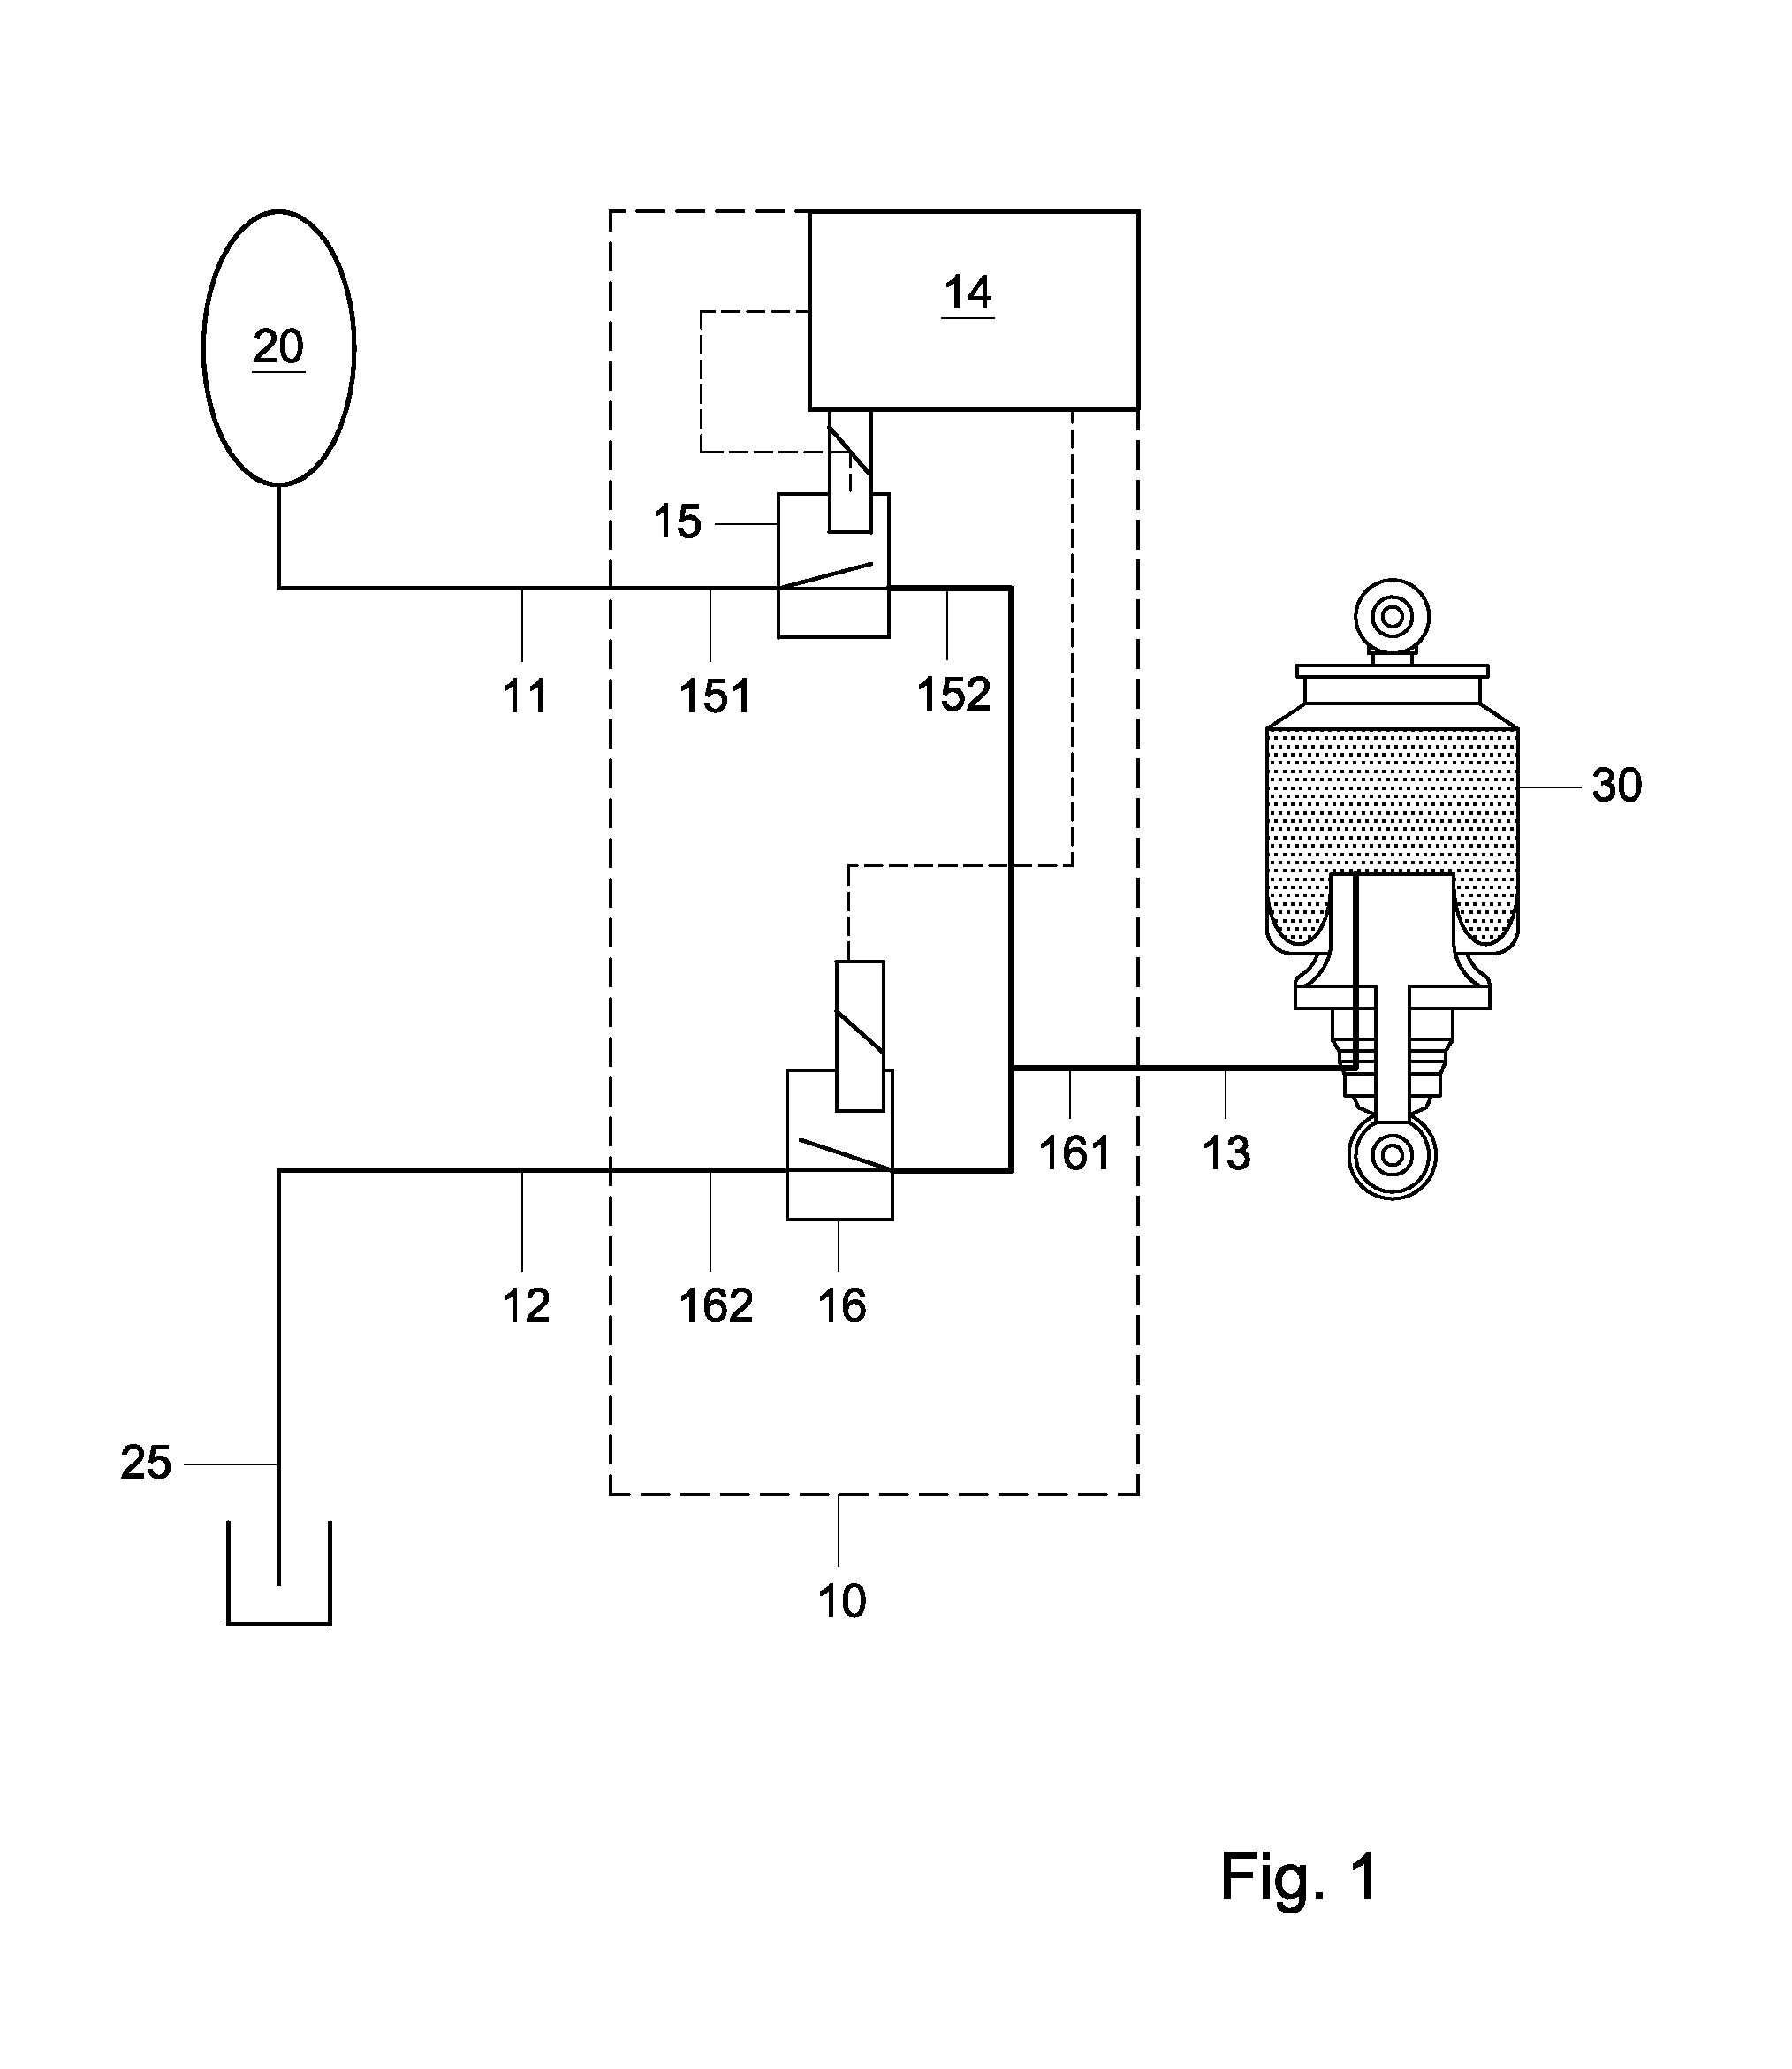 Suspension system for a driver's compartment of a vehicle